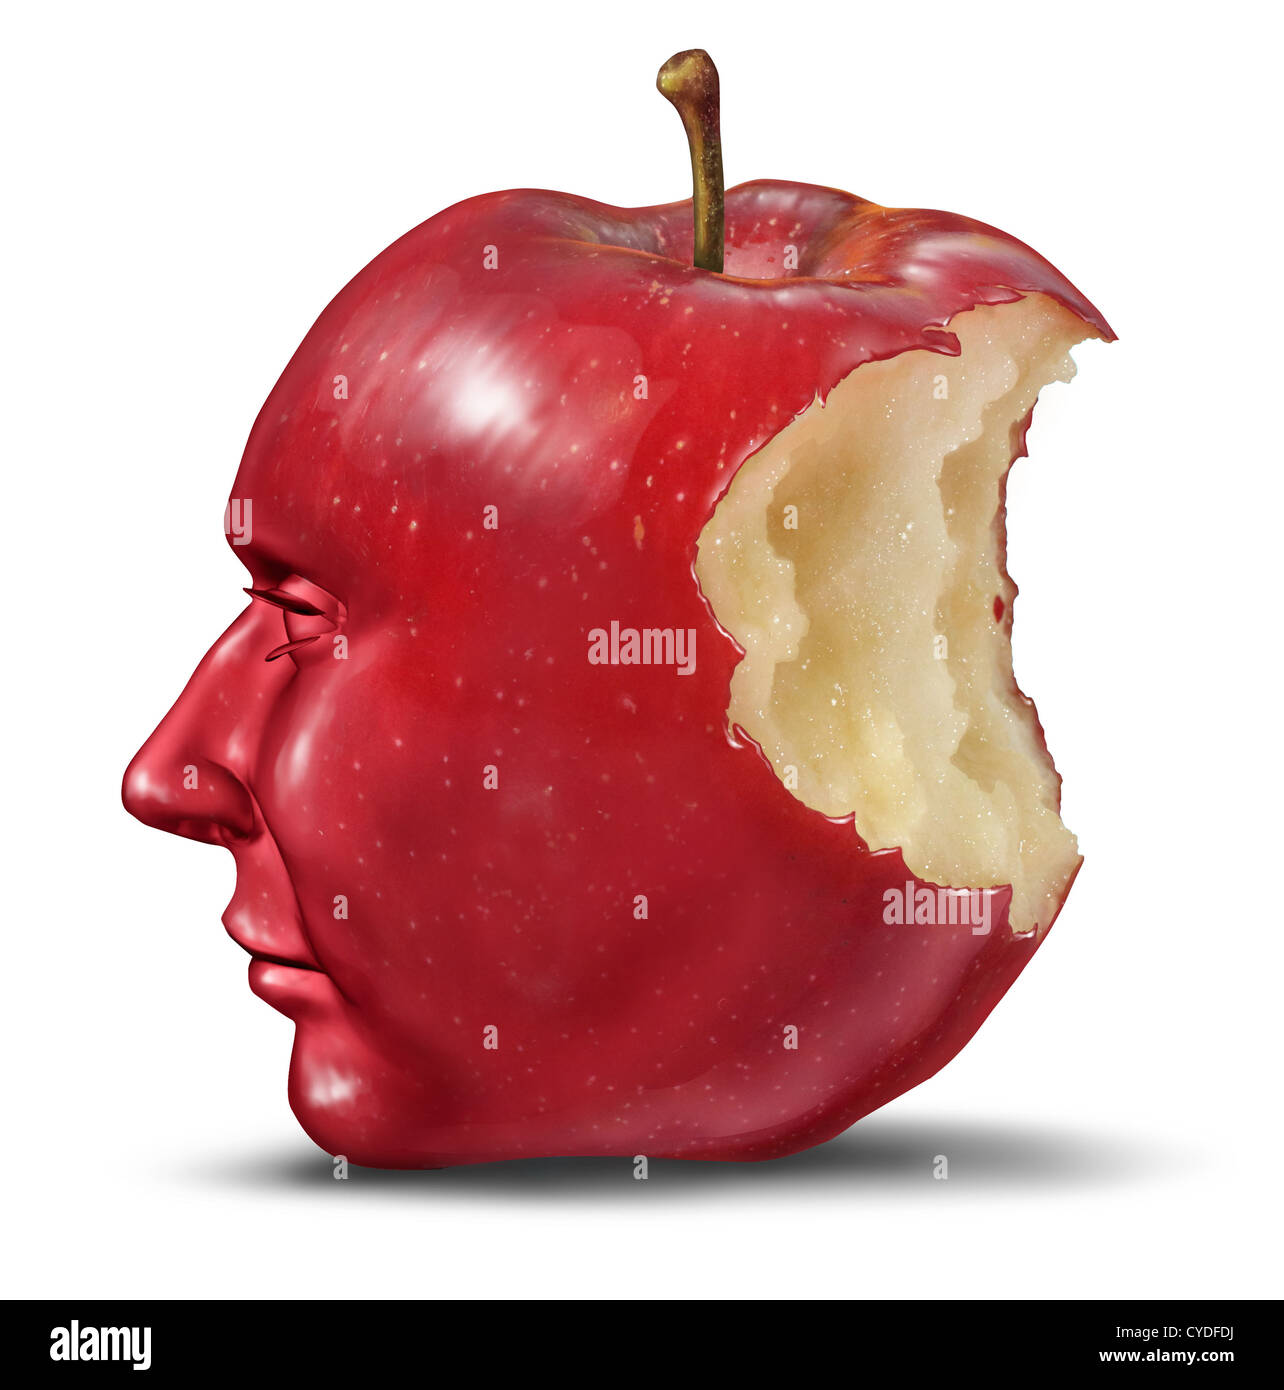 Depression and loneliness with human head in the shape of an apple with a bite eaten out of the red fruit as a health care symbo Stock Photo